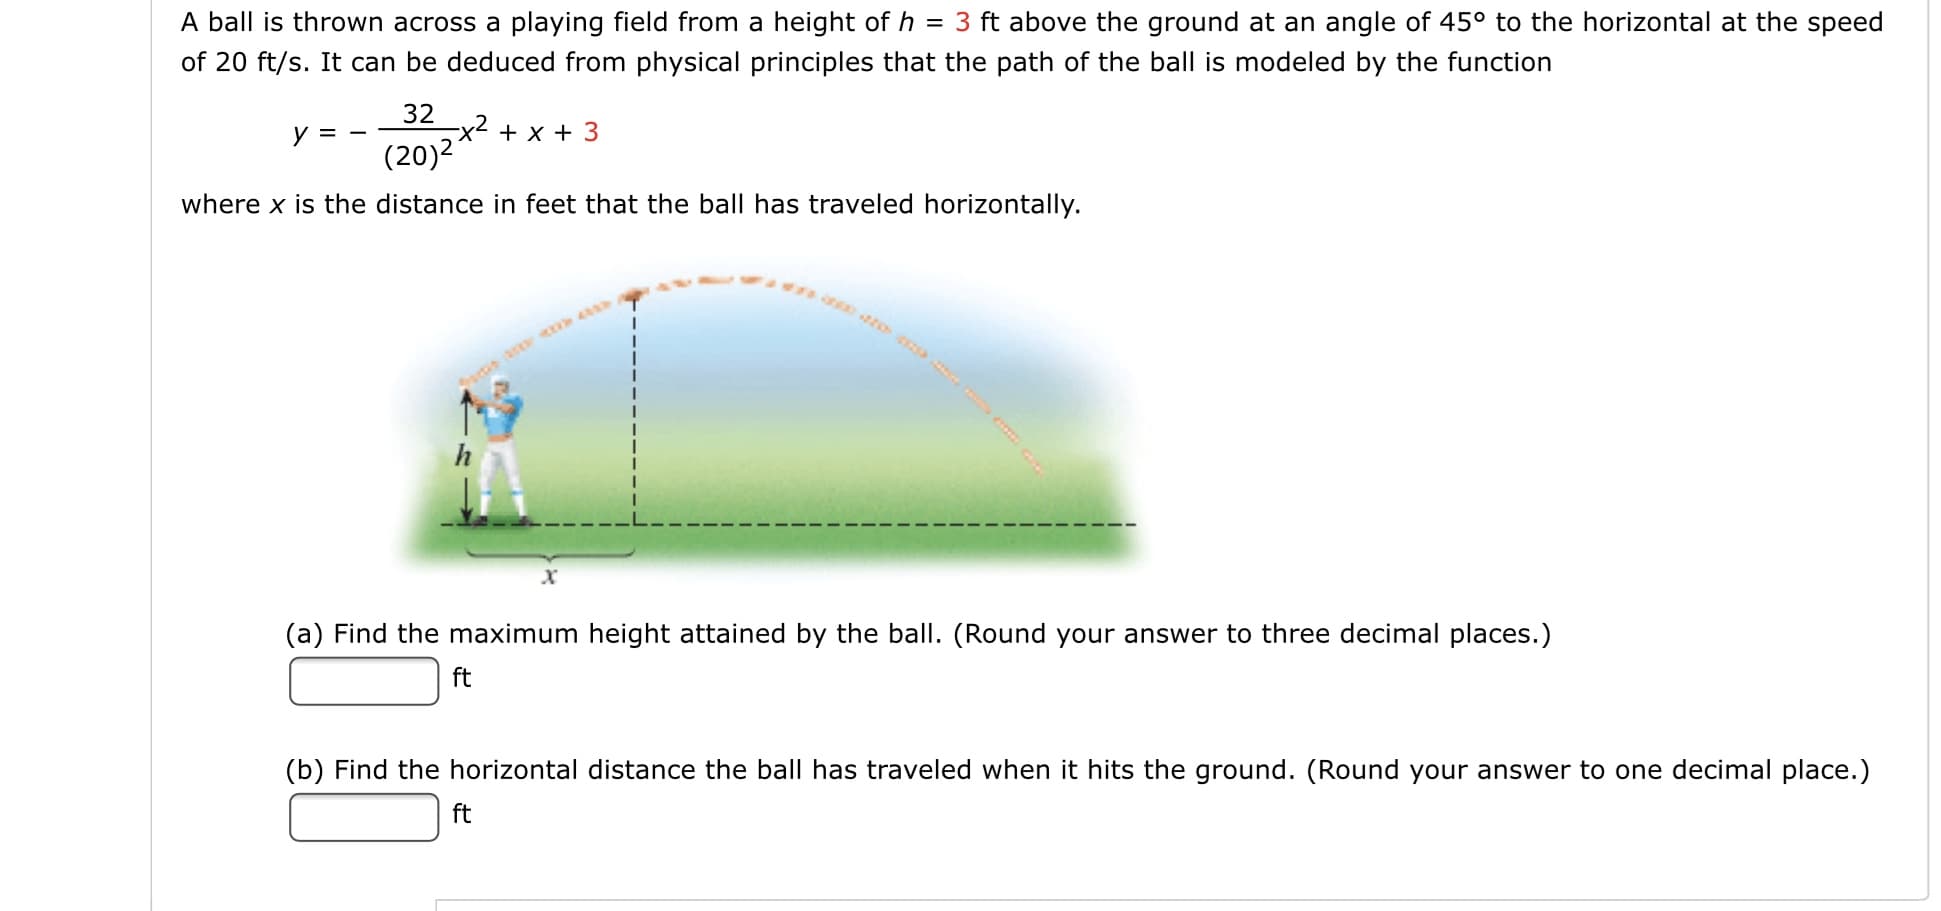 A ball is thrown across a playing field from a height of h = 3 ft above the ground at an angle of 45° to the horizontal at the speed
of 20 ft/s. It can be deduced from physical principles that the path of the ball is modeled by the function
32
x2
(20)2
y = -
+ x + 3
where x is the distance in feet that the ball has traveled horizontally.
(a) Find the maximum height attained by the ball. (Round your answer to three decimal places.)
ft
(b) Find the horizontal distance the ball has traveled when it hits the ground. (Round your answer to one decimal place.)
ft
